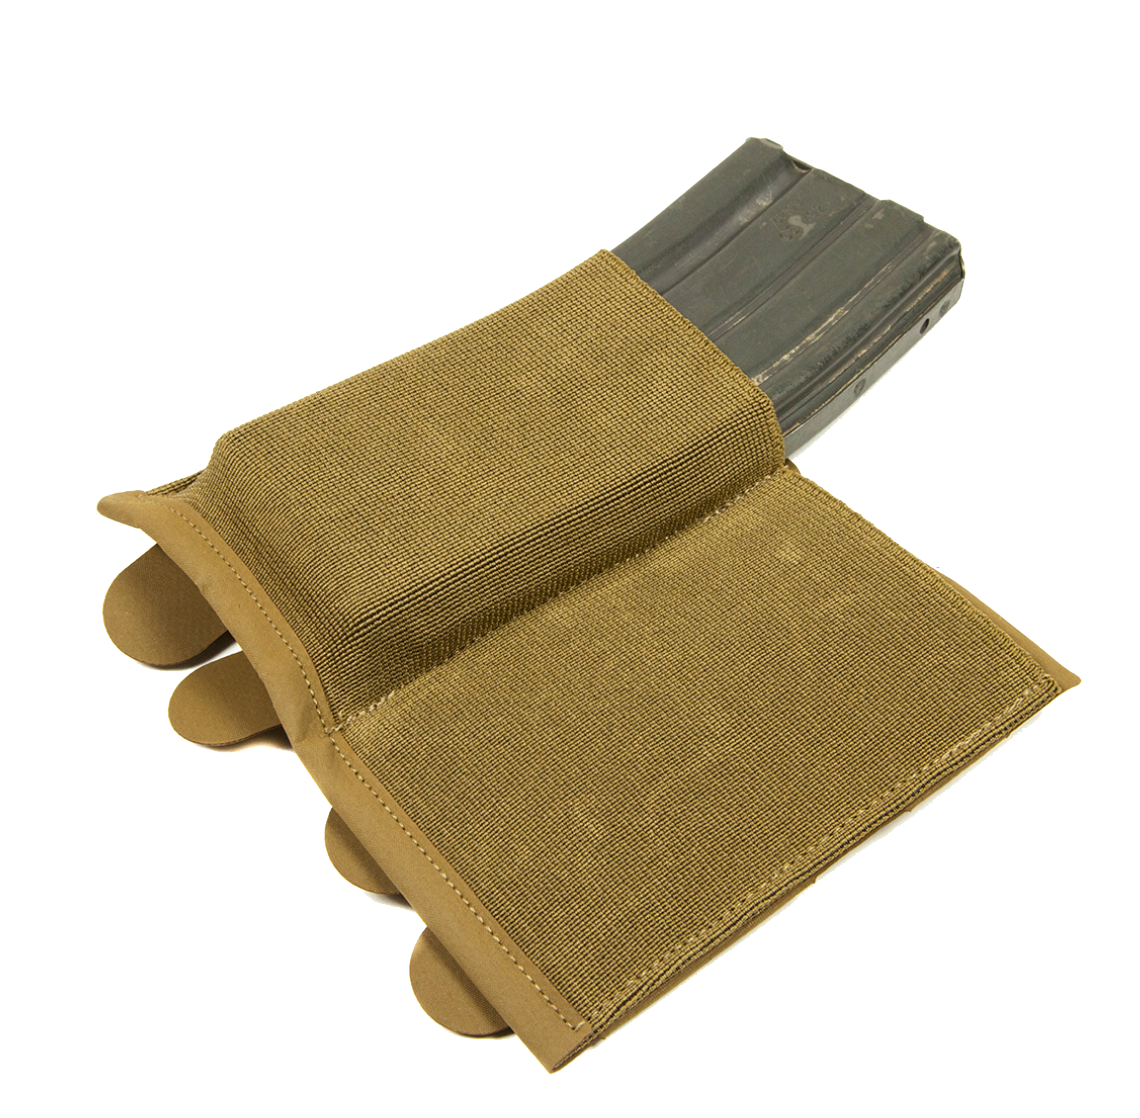 SHE-21039 Low Profile Double M4 Mag Pouch